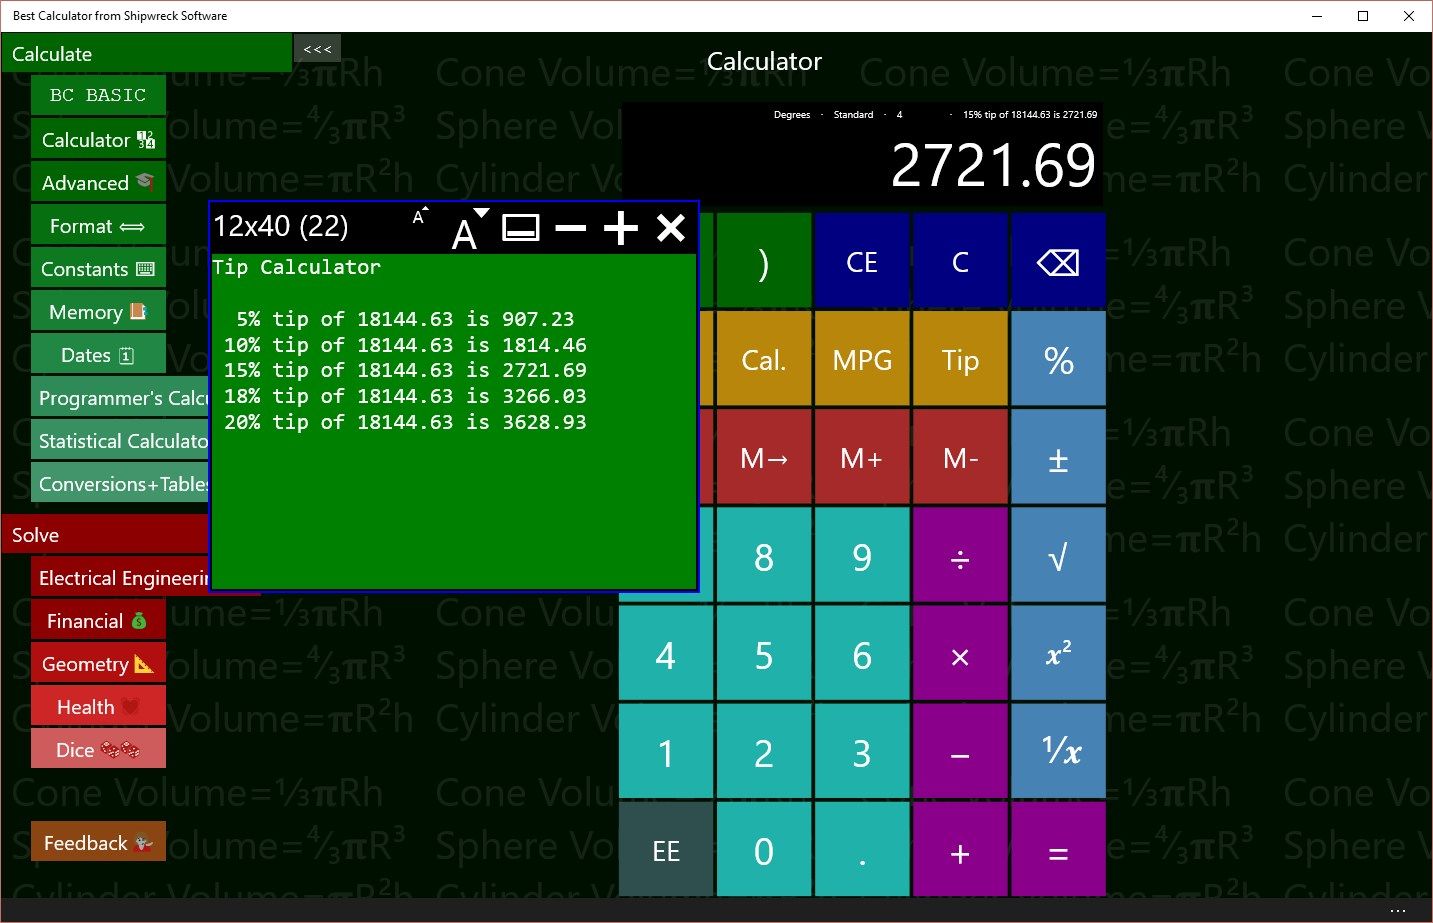 Run your programs straight from the calculator keyboard